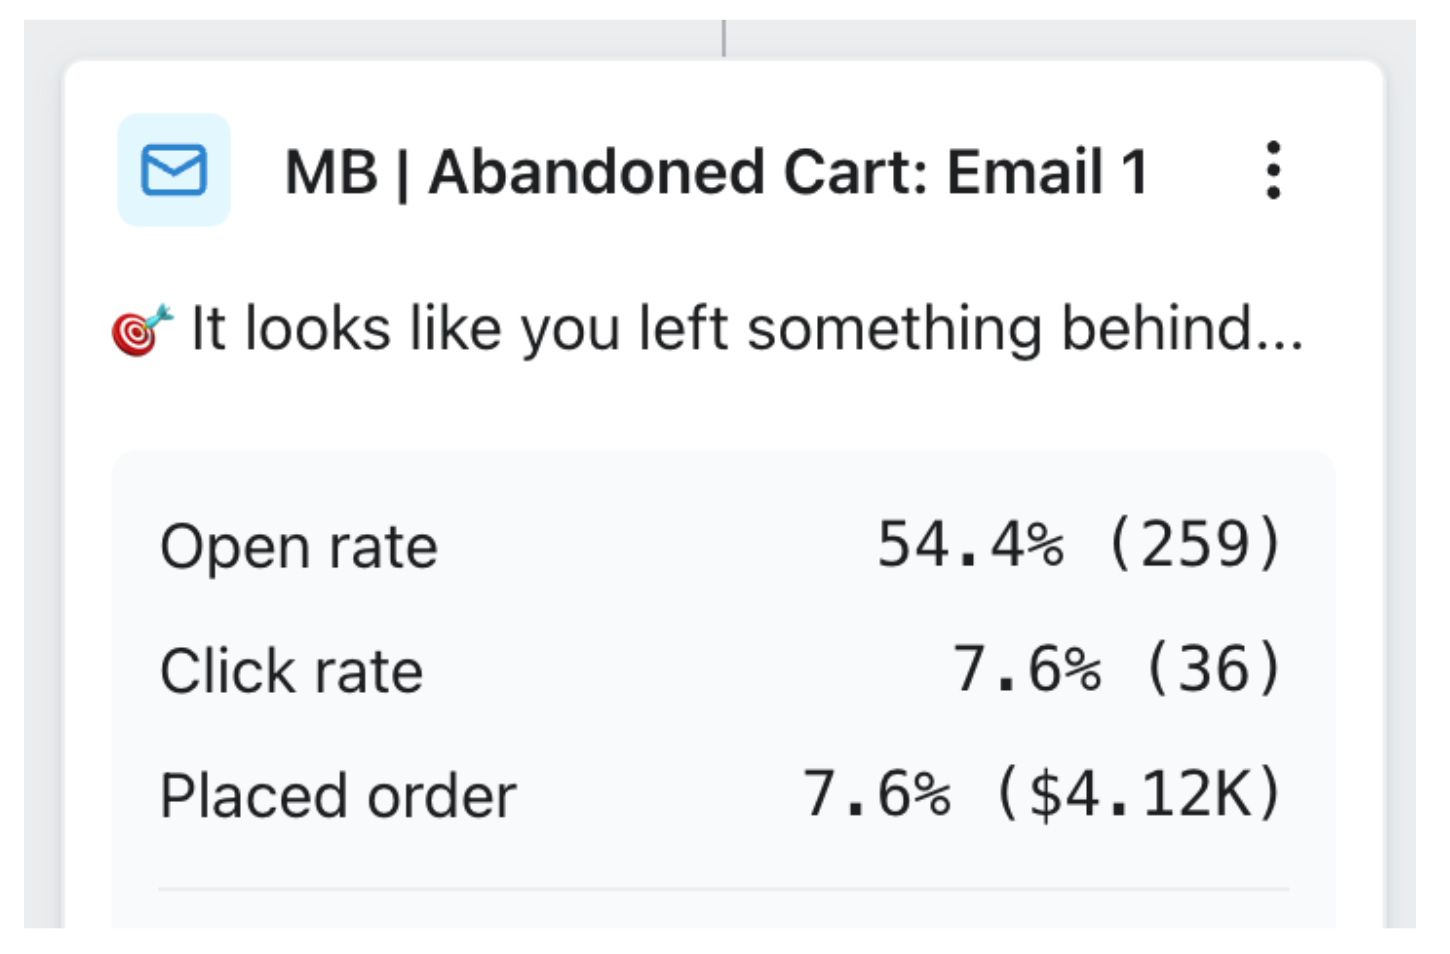 Abandoned Cart Emails: A Gold Mine for Outdoor Sports Sales